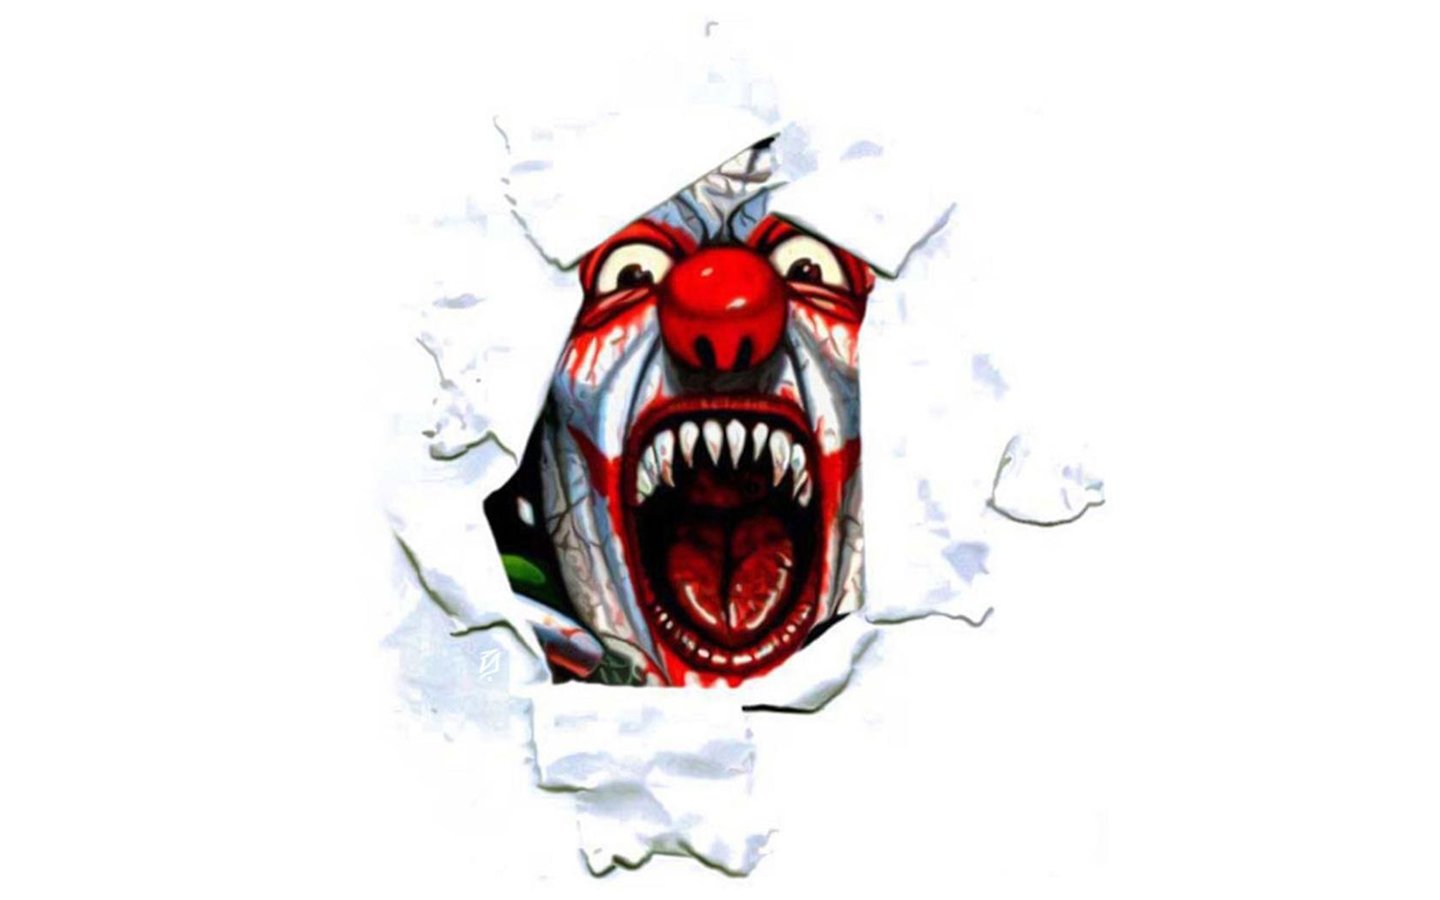 Horror Clown Pack 2 Wallpaper - Android Apps and Tests - AndroidPIT